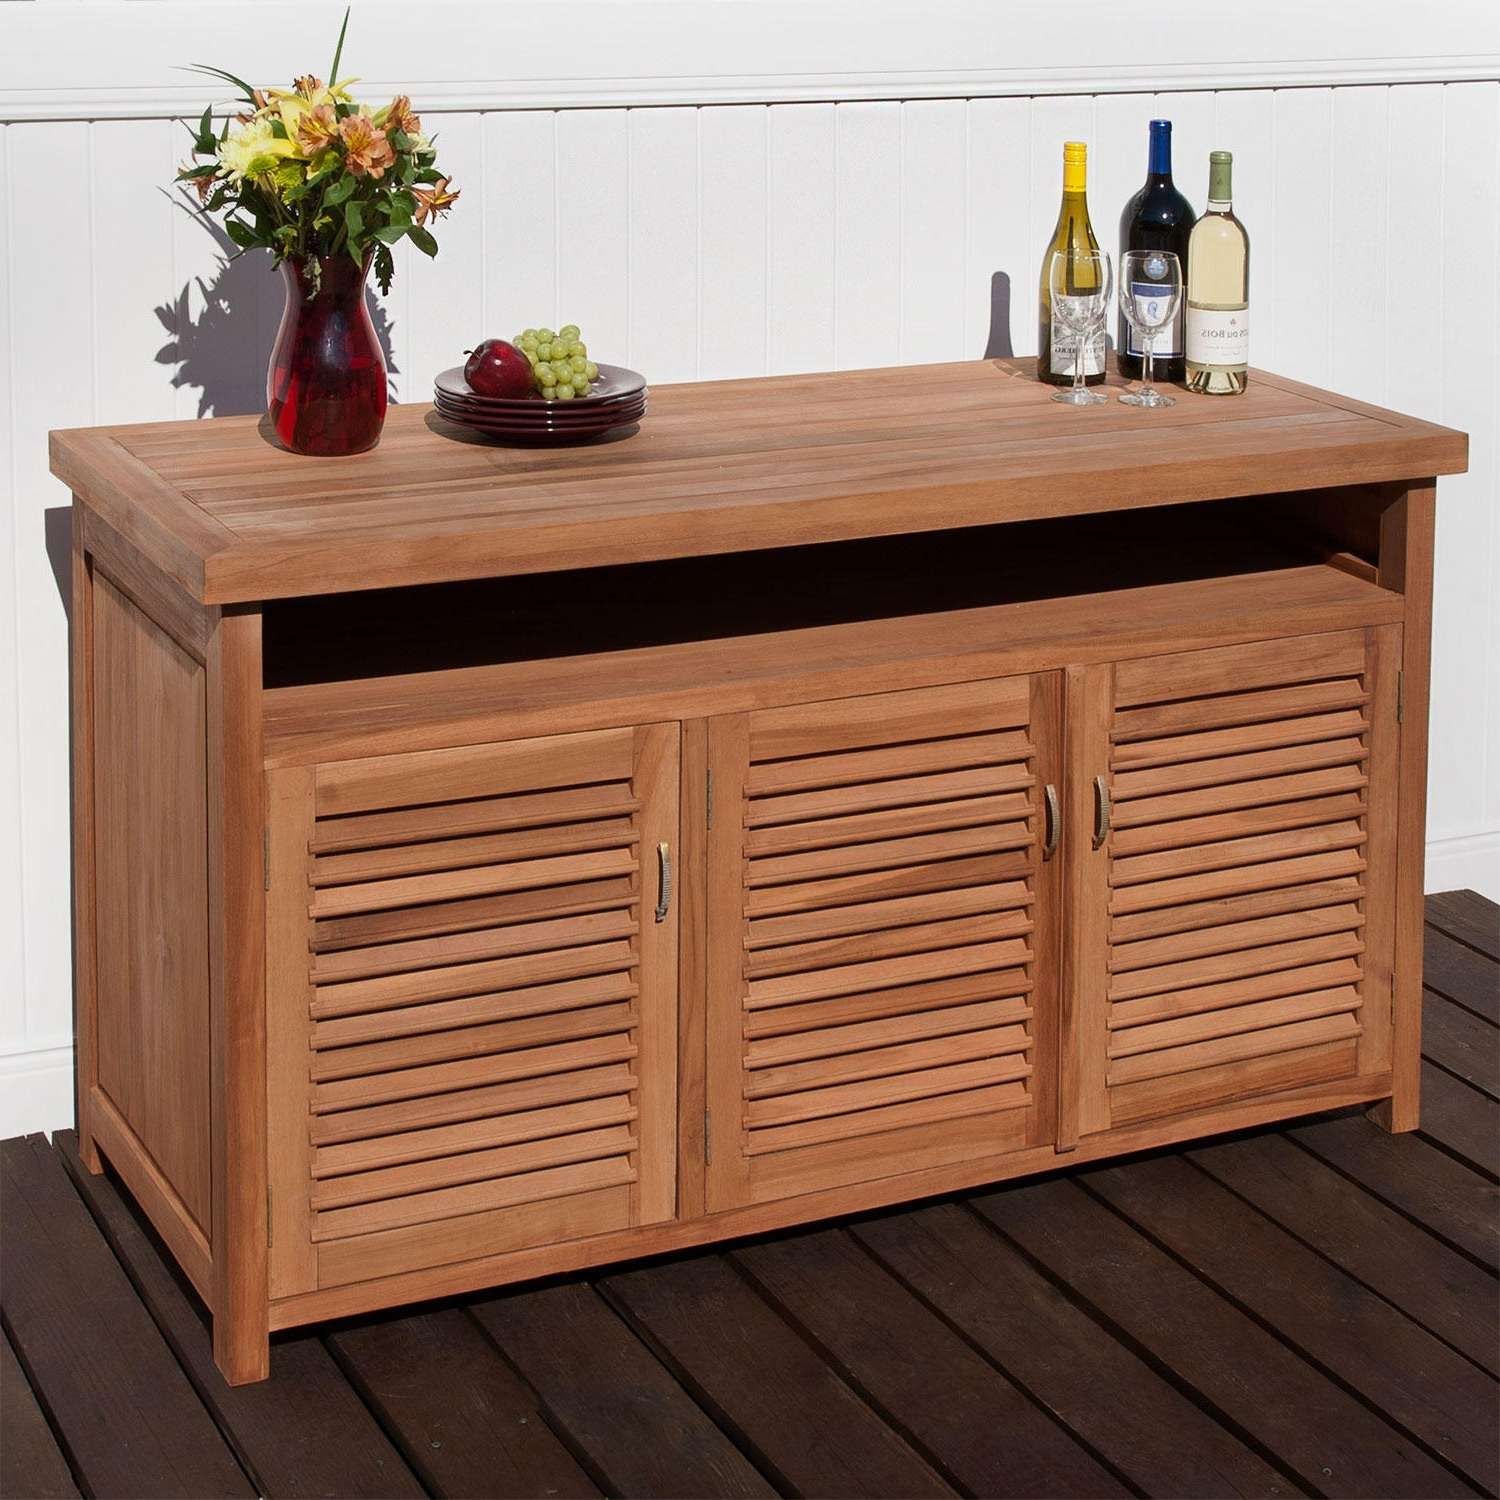 Teak Outdoor Buffet With Storage – Outdoor Within Outdoor Sideboards (View 2 of 20)